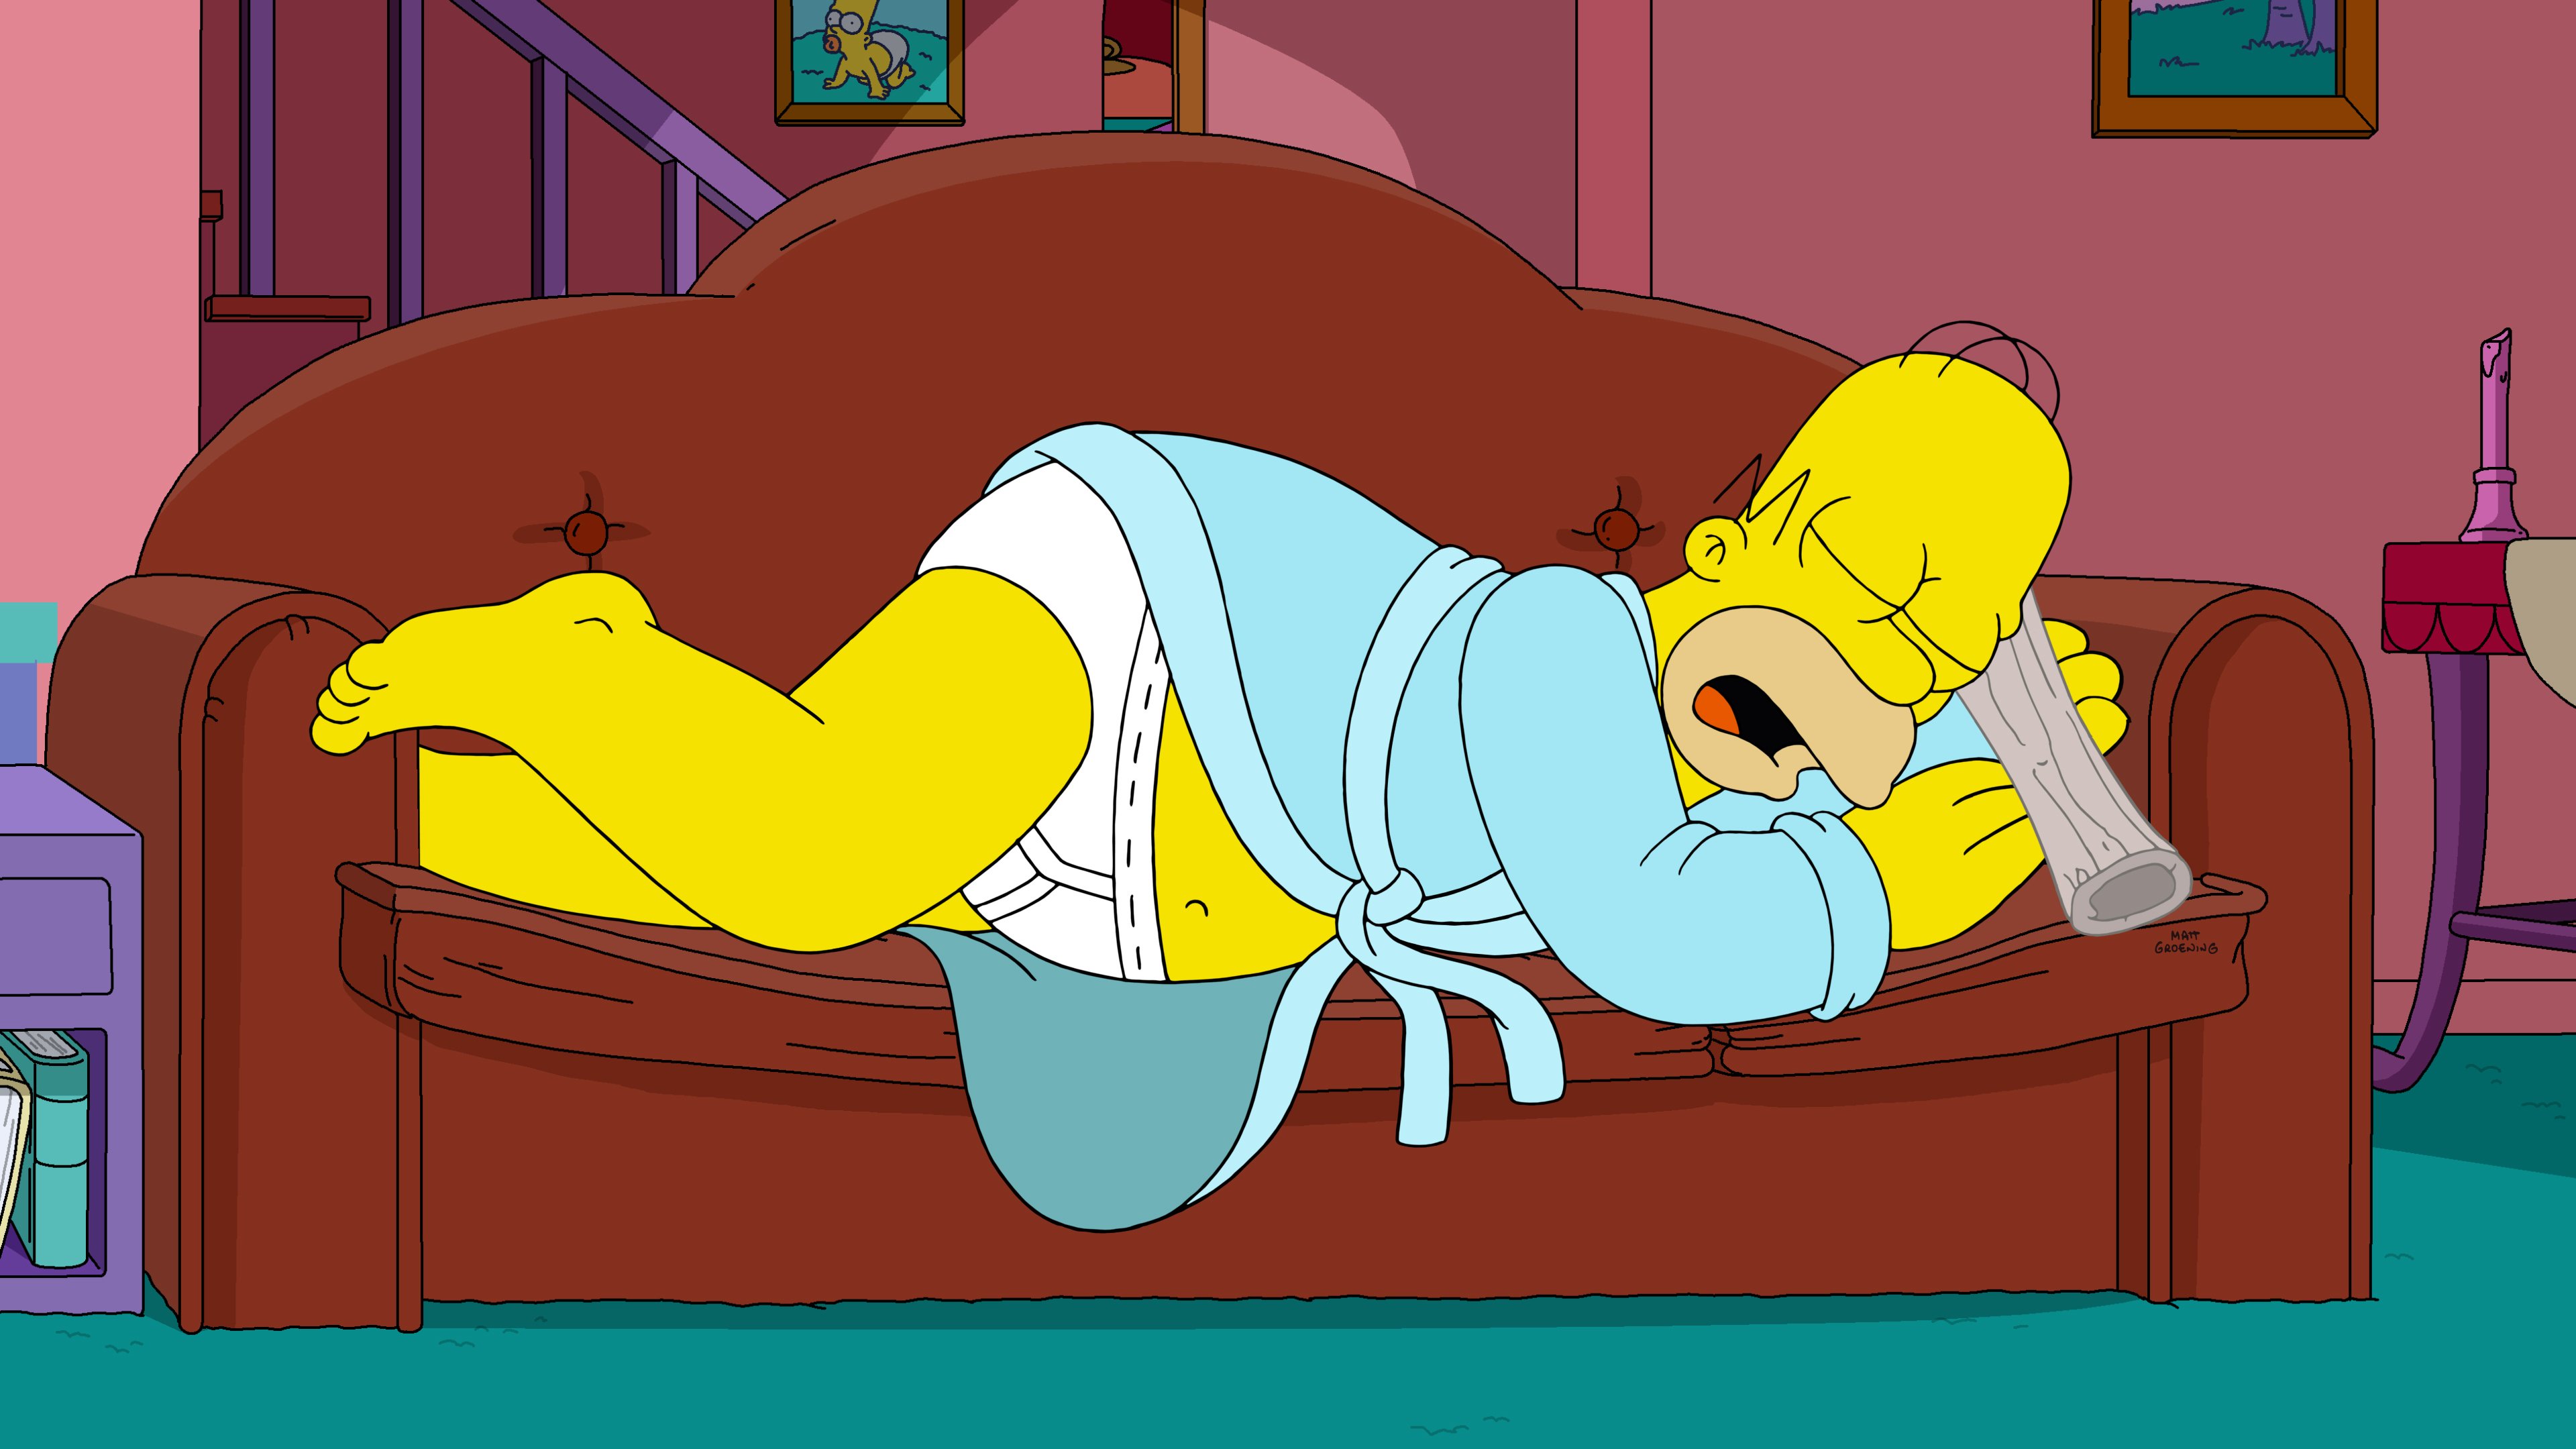 The Simpsons: Homer sleeping on the couch